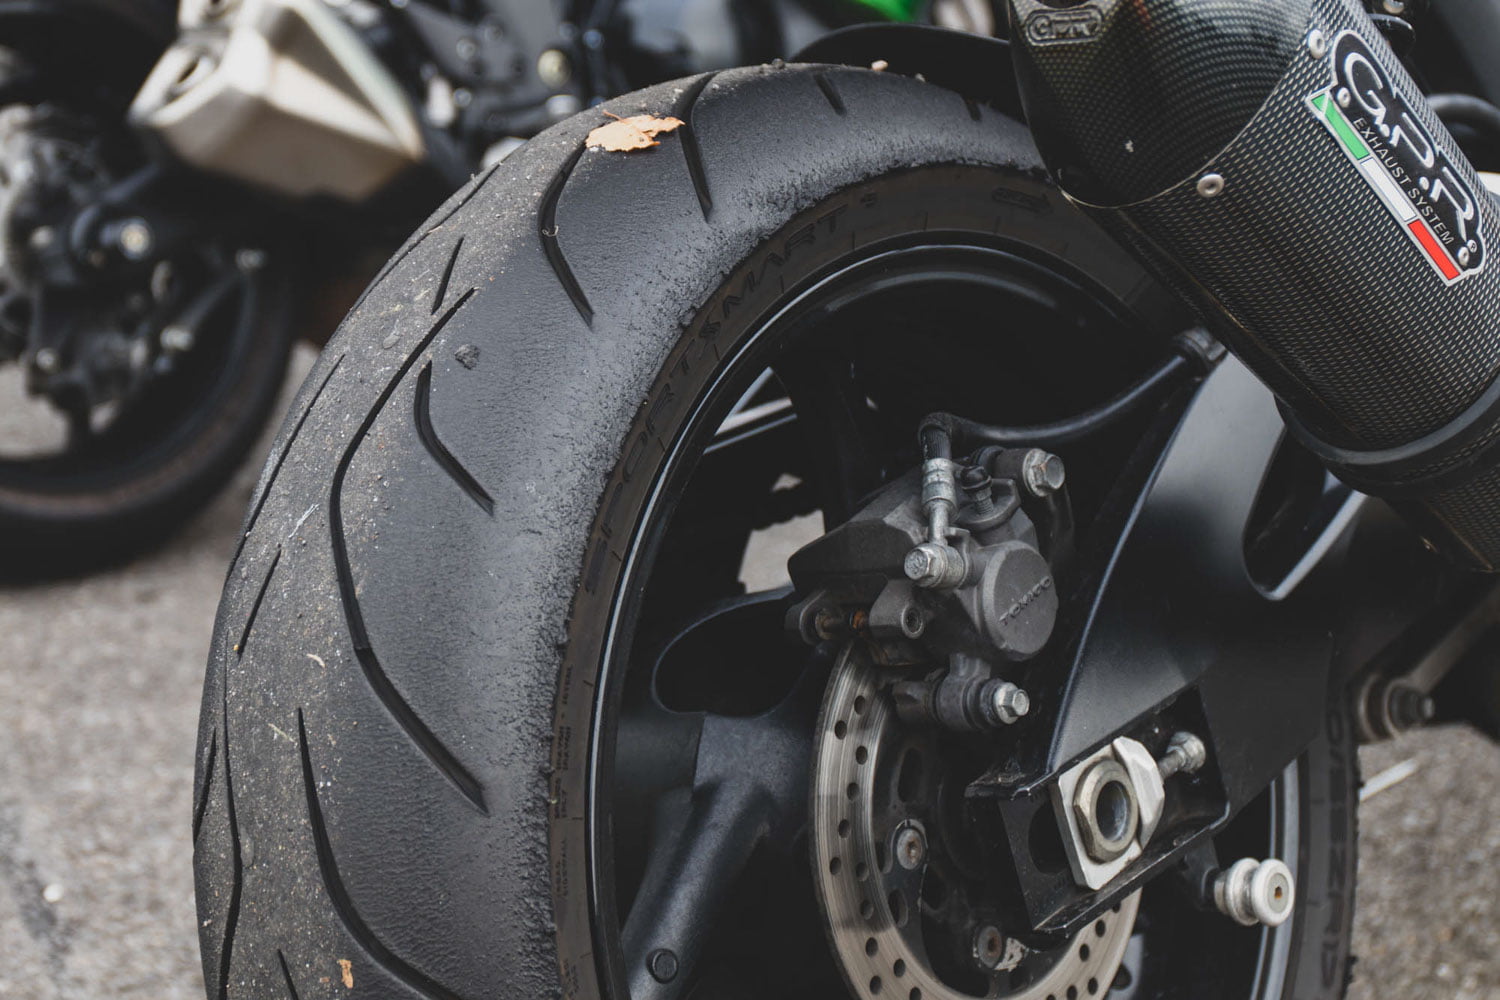 The best tyres for sports bikes and super nakeds? Dunlop Sportsmart Mk3